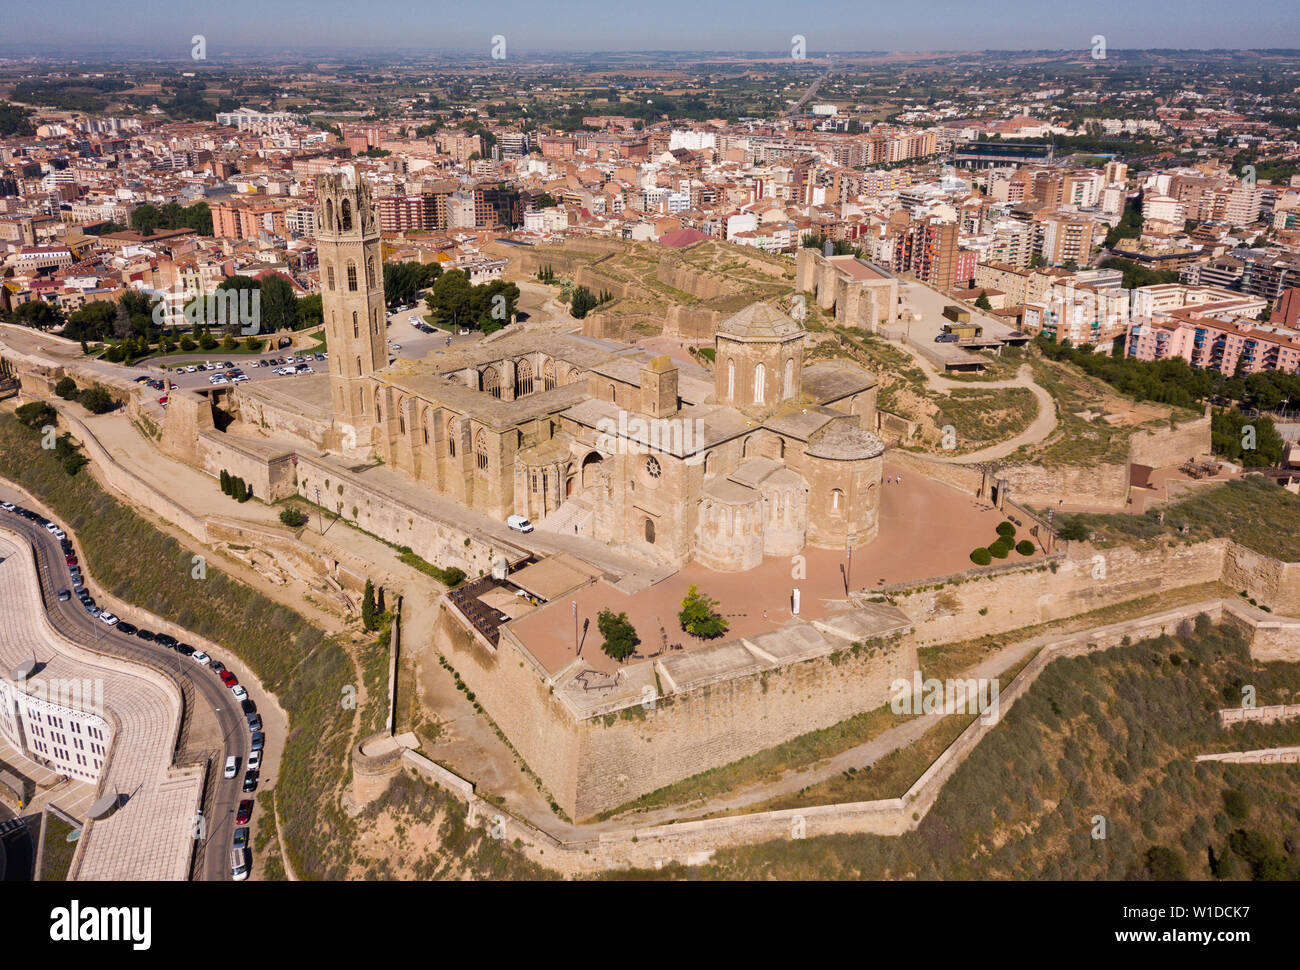 View from drone of ancient Old Cathedral of Lleida and urban landscape of Catalan city of Lleida, Spain Stock Photo